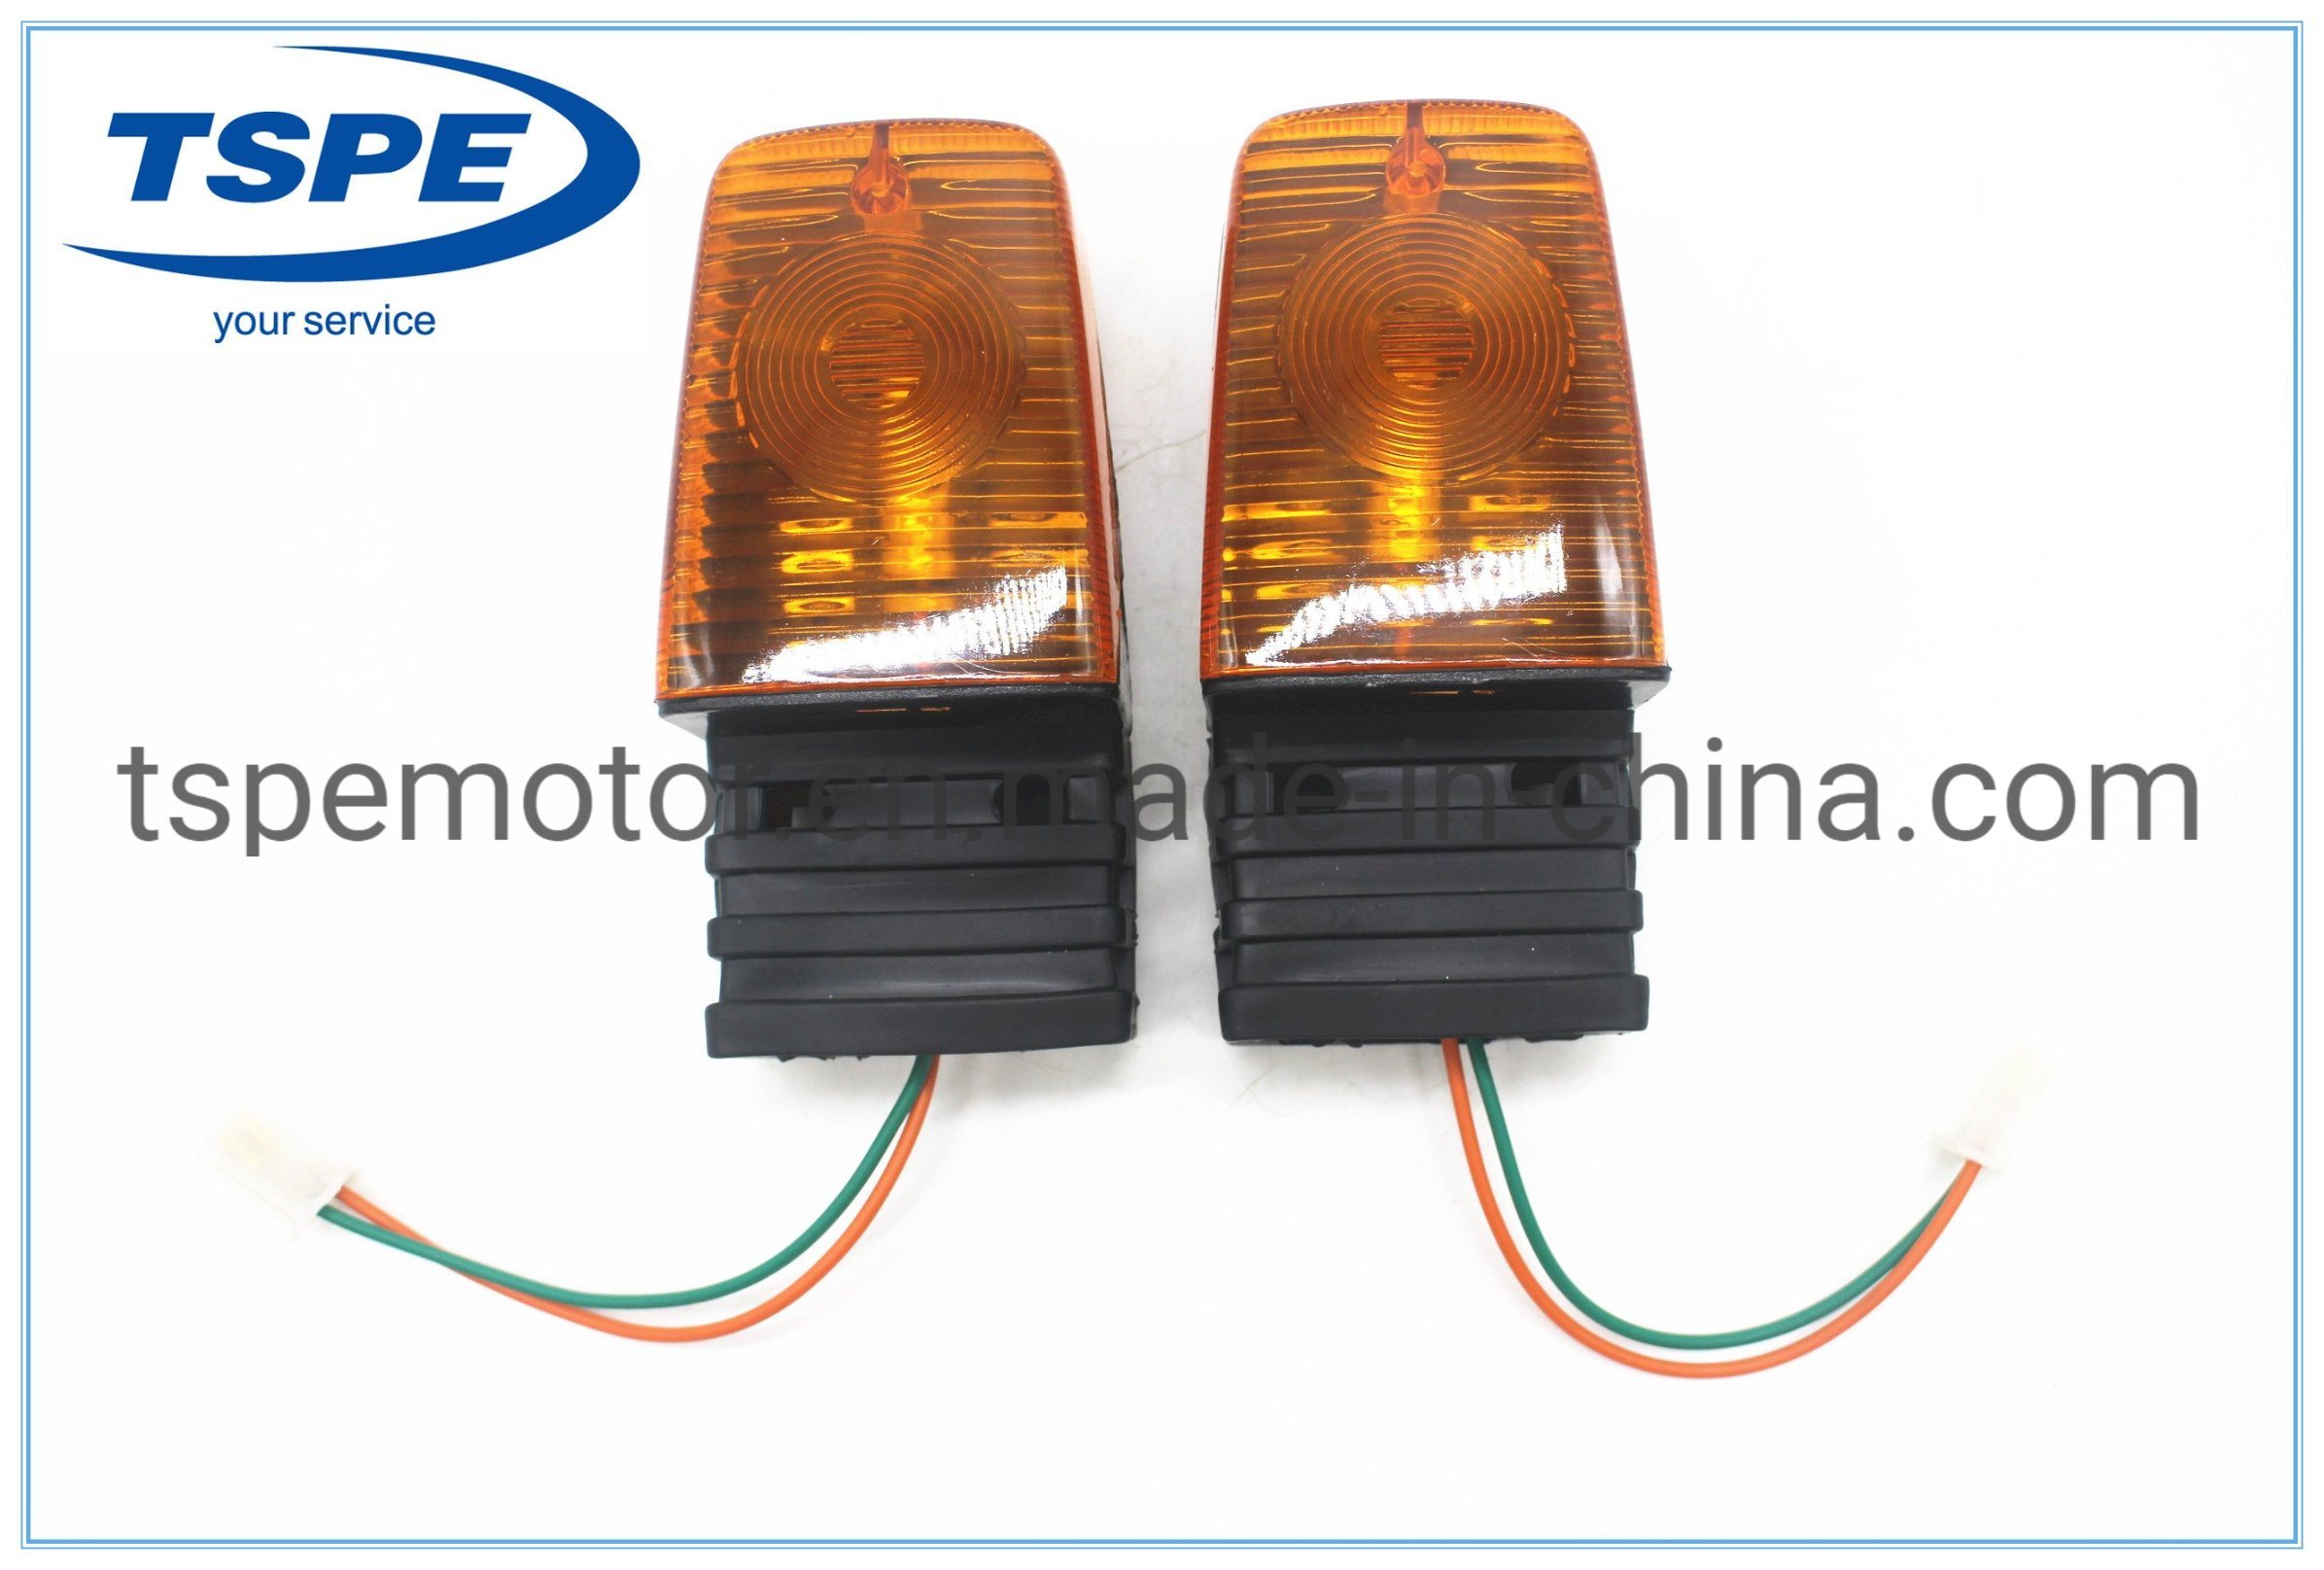 Cgl-125 Motorcycle Parts Motorcycle Turning Light